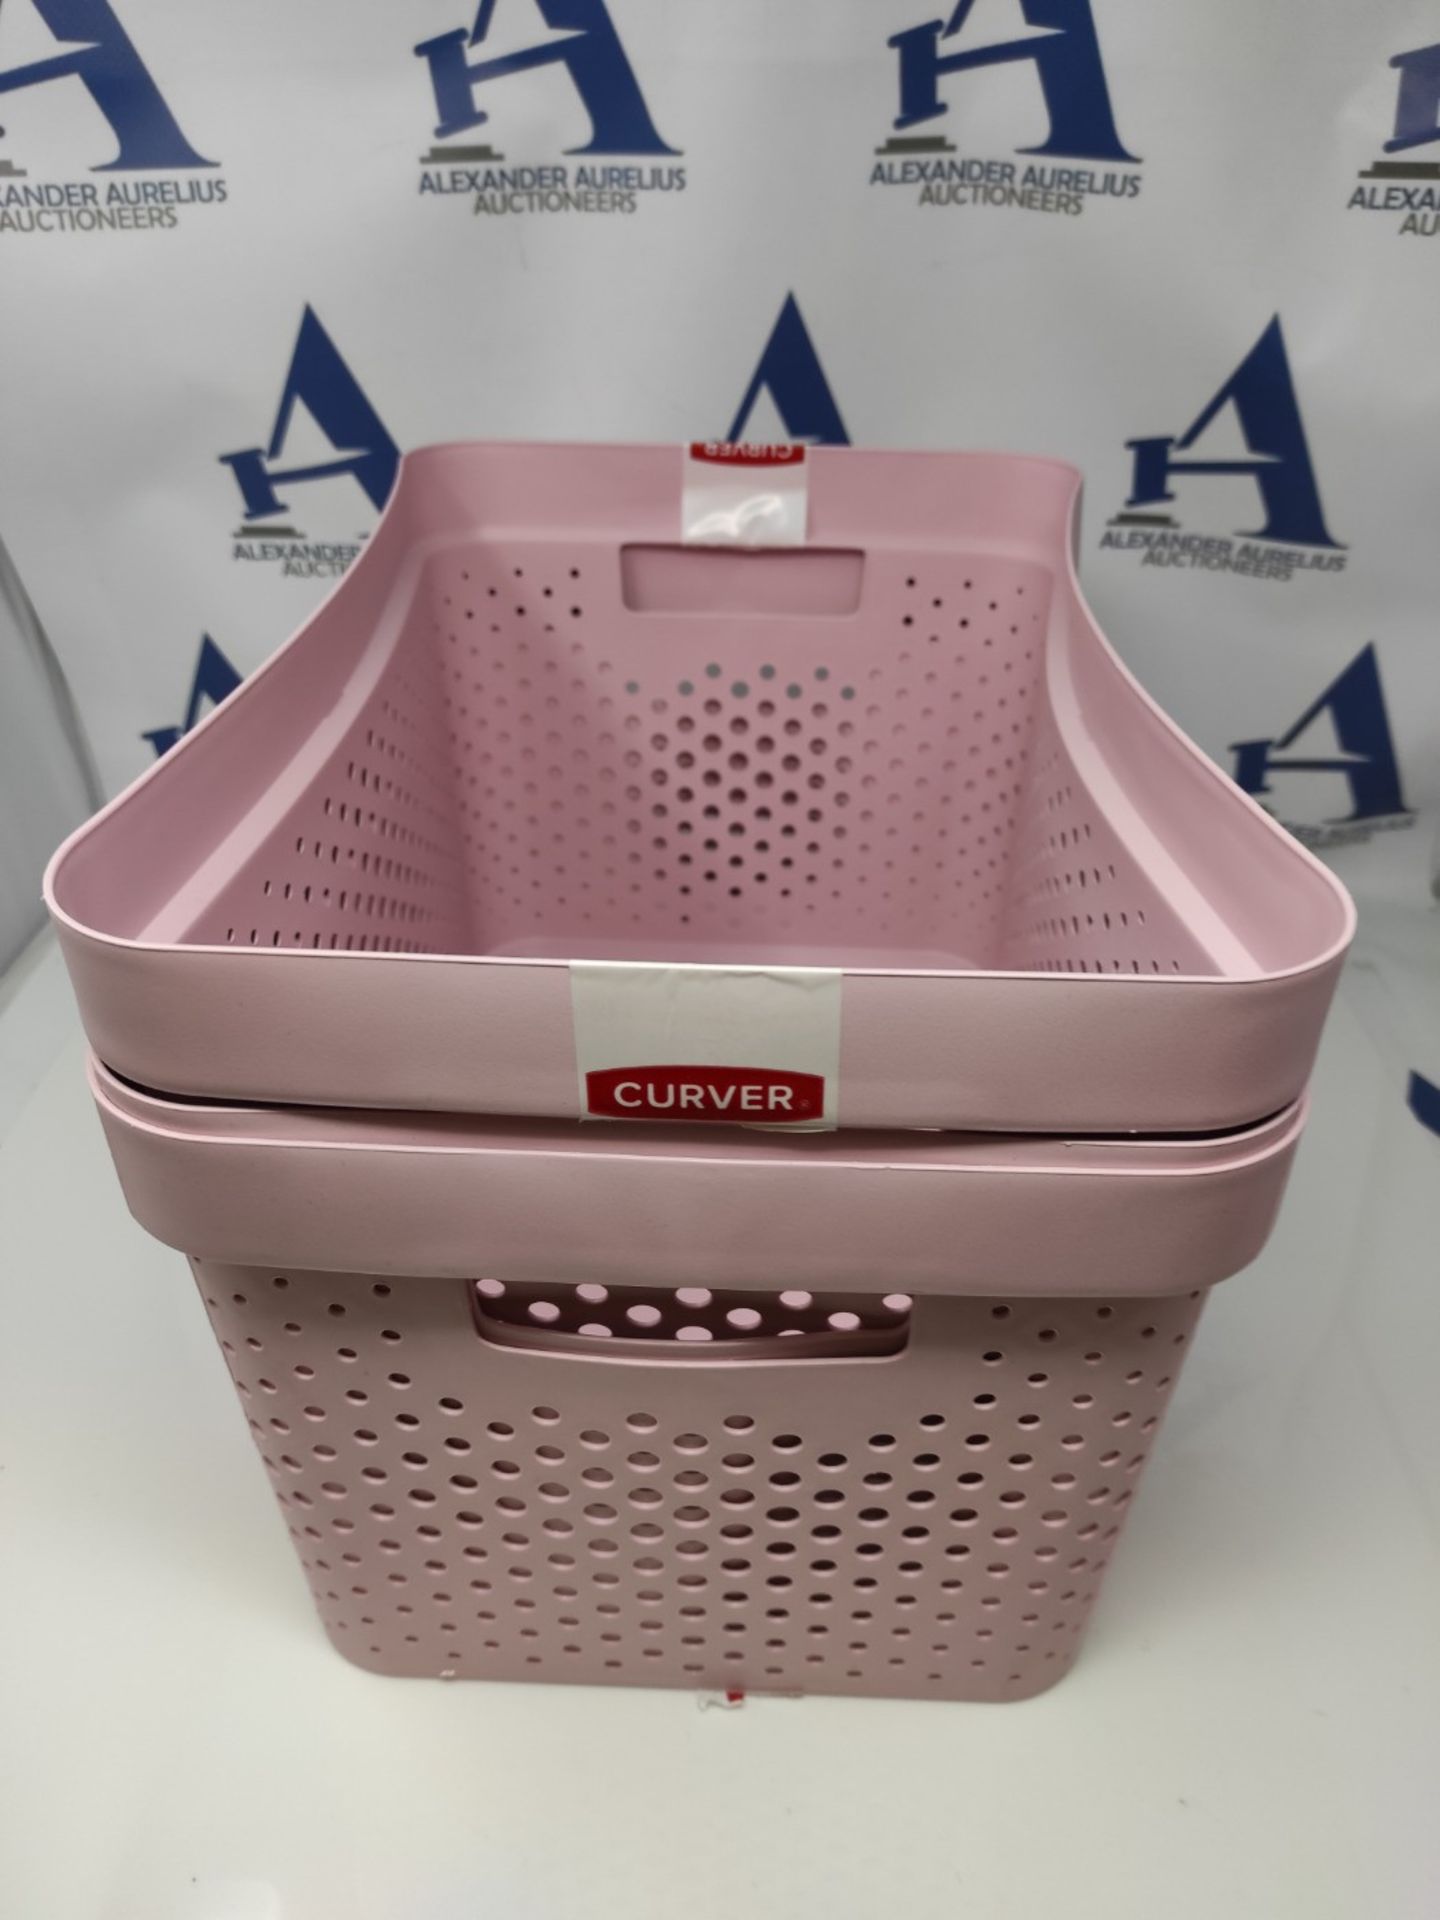 Curver Infinity Dots Set of 3 100% Recycled Large Storage Baskets 17 Litres - Pink - Image 2 of 2